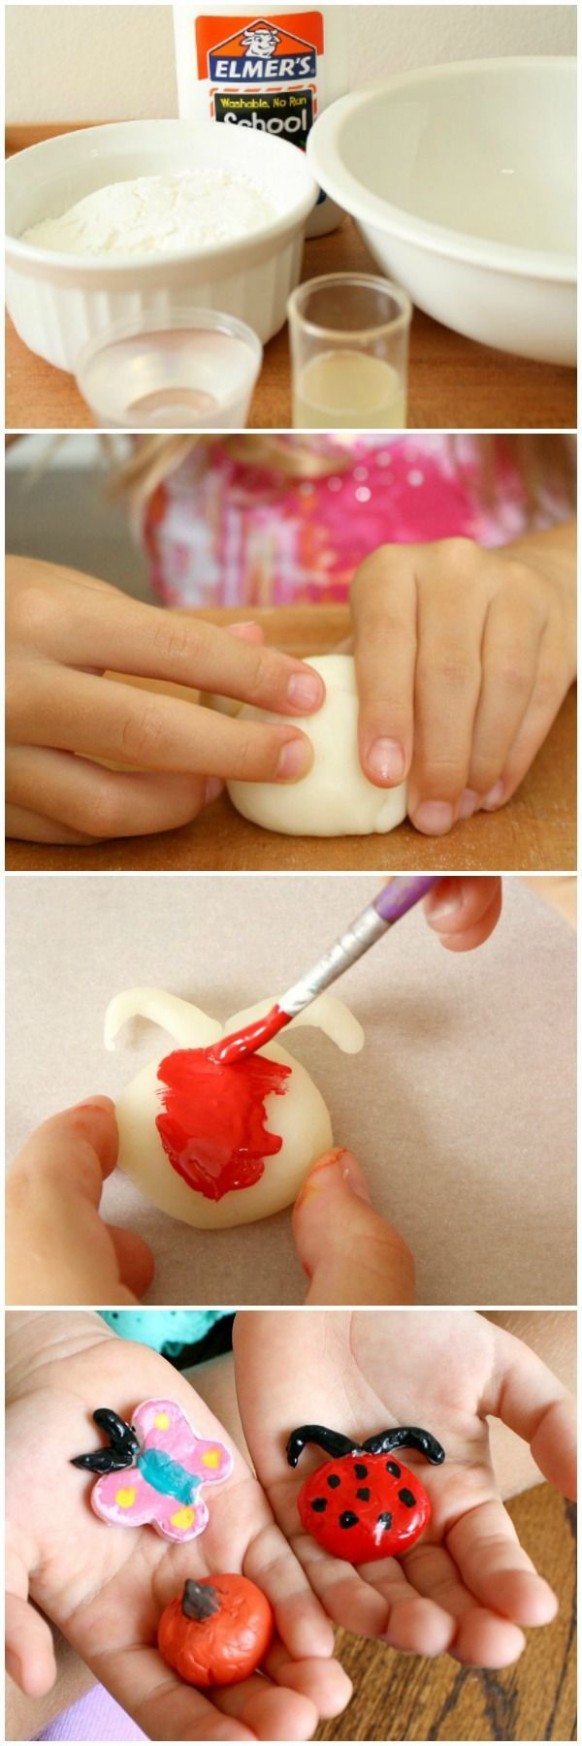 Diy Air Dry Clay Recipe For Craft Projects | Diy Air Dry Clay, Air ..